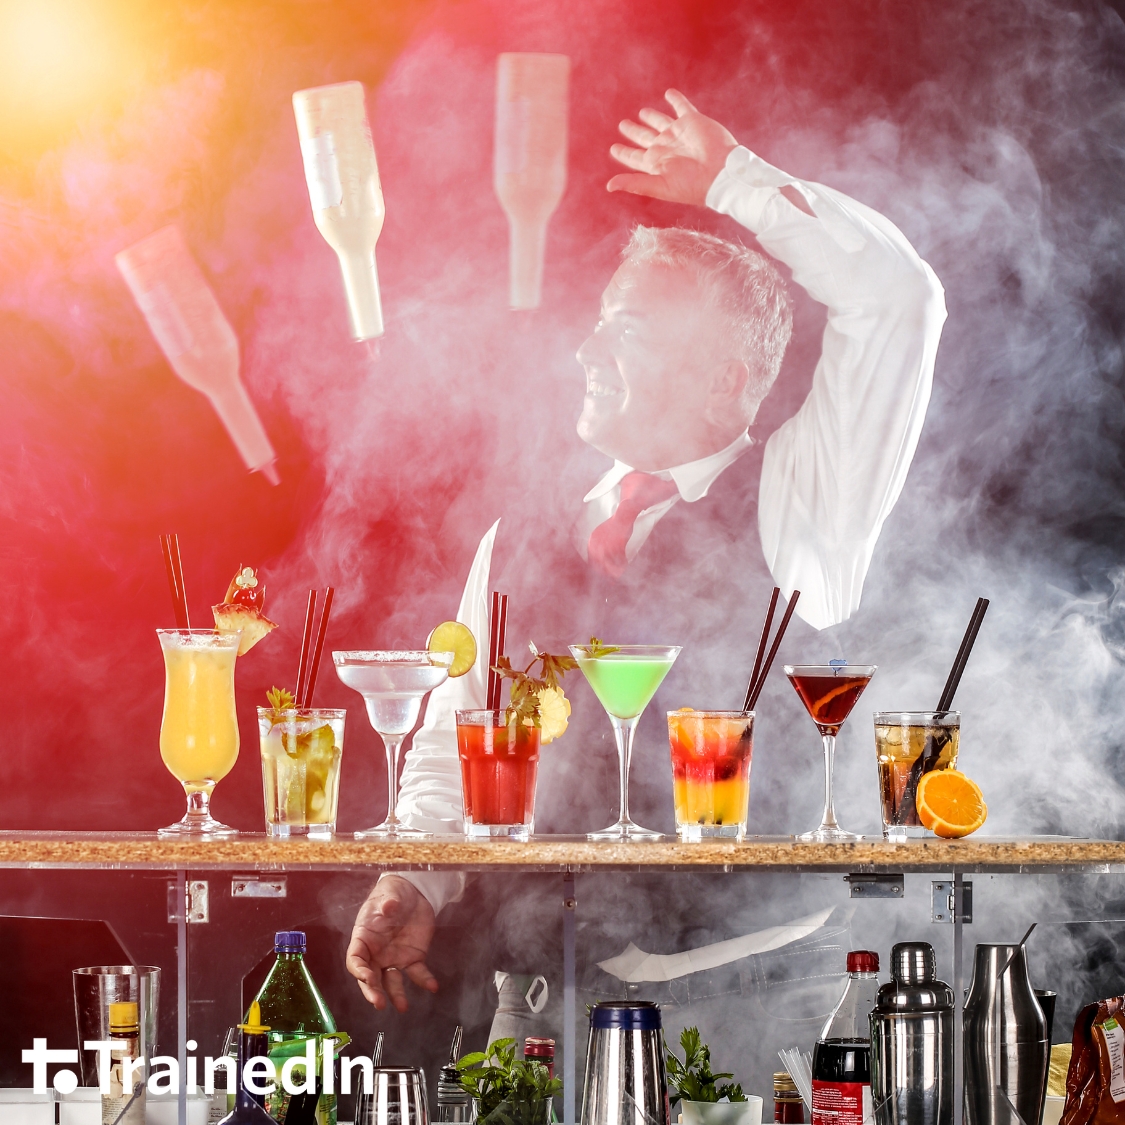 Hands-on advanced Cocktail Making course. For course details get in touch with us today sorcha@trainedin.global  #Sales #HumanSkill #business #training #success ##strategy #cocktail #bartender #cocktails #mixology #cocktail #bar #bartenderlife